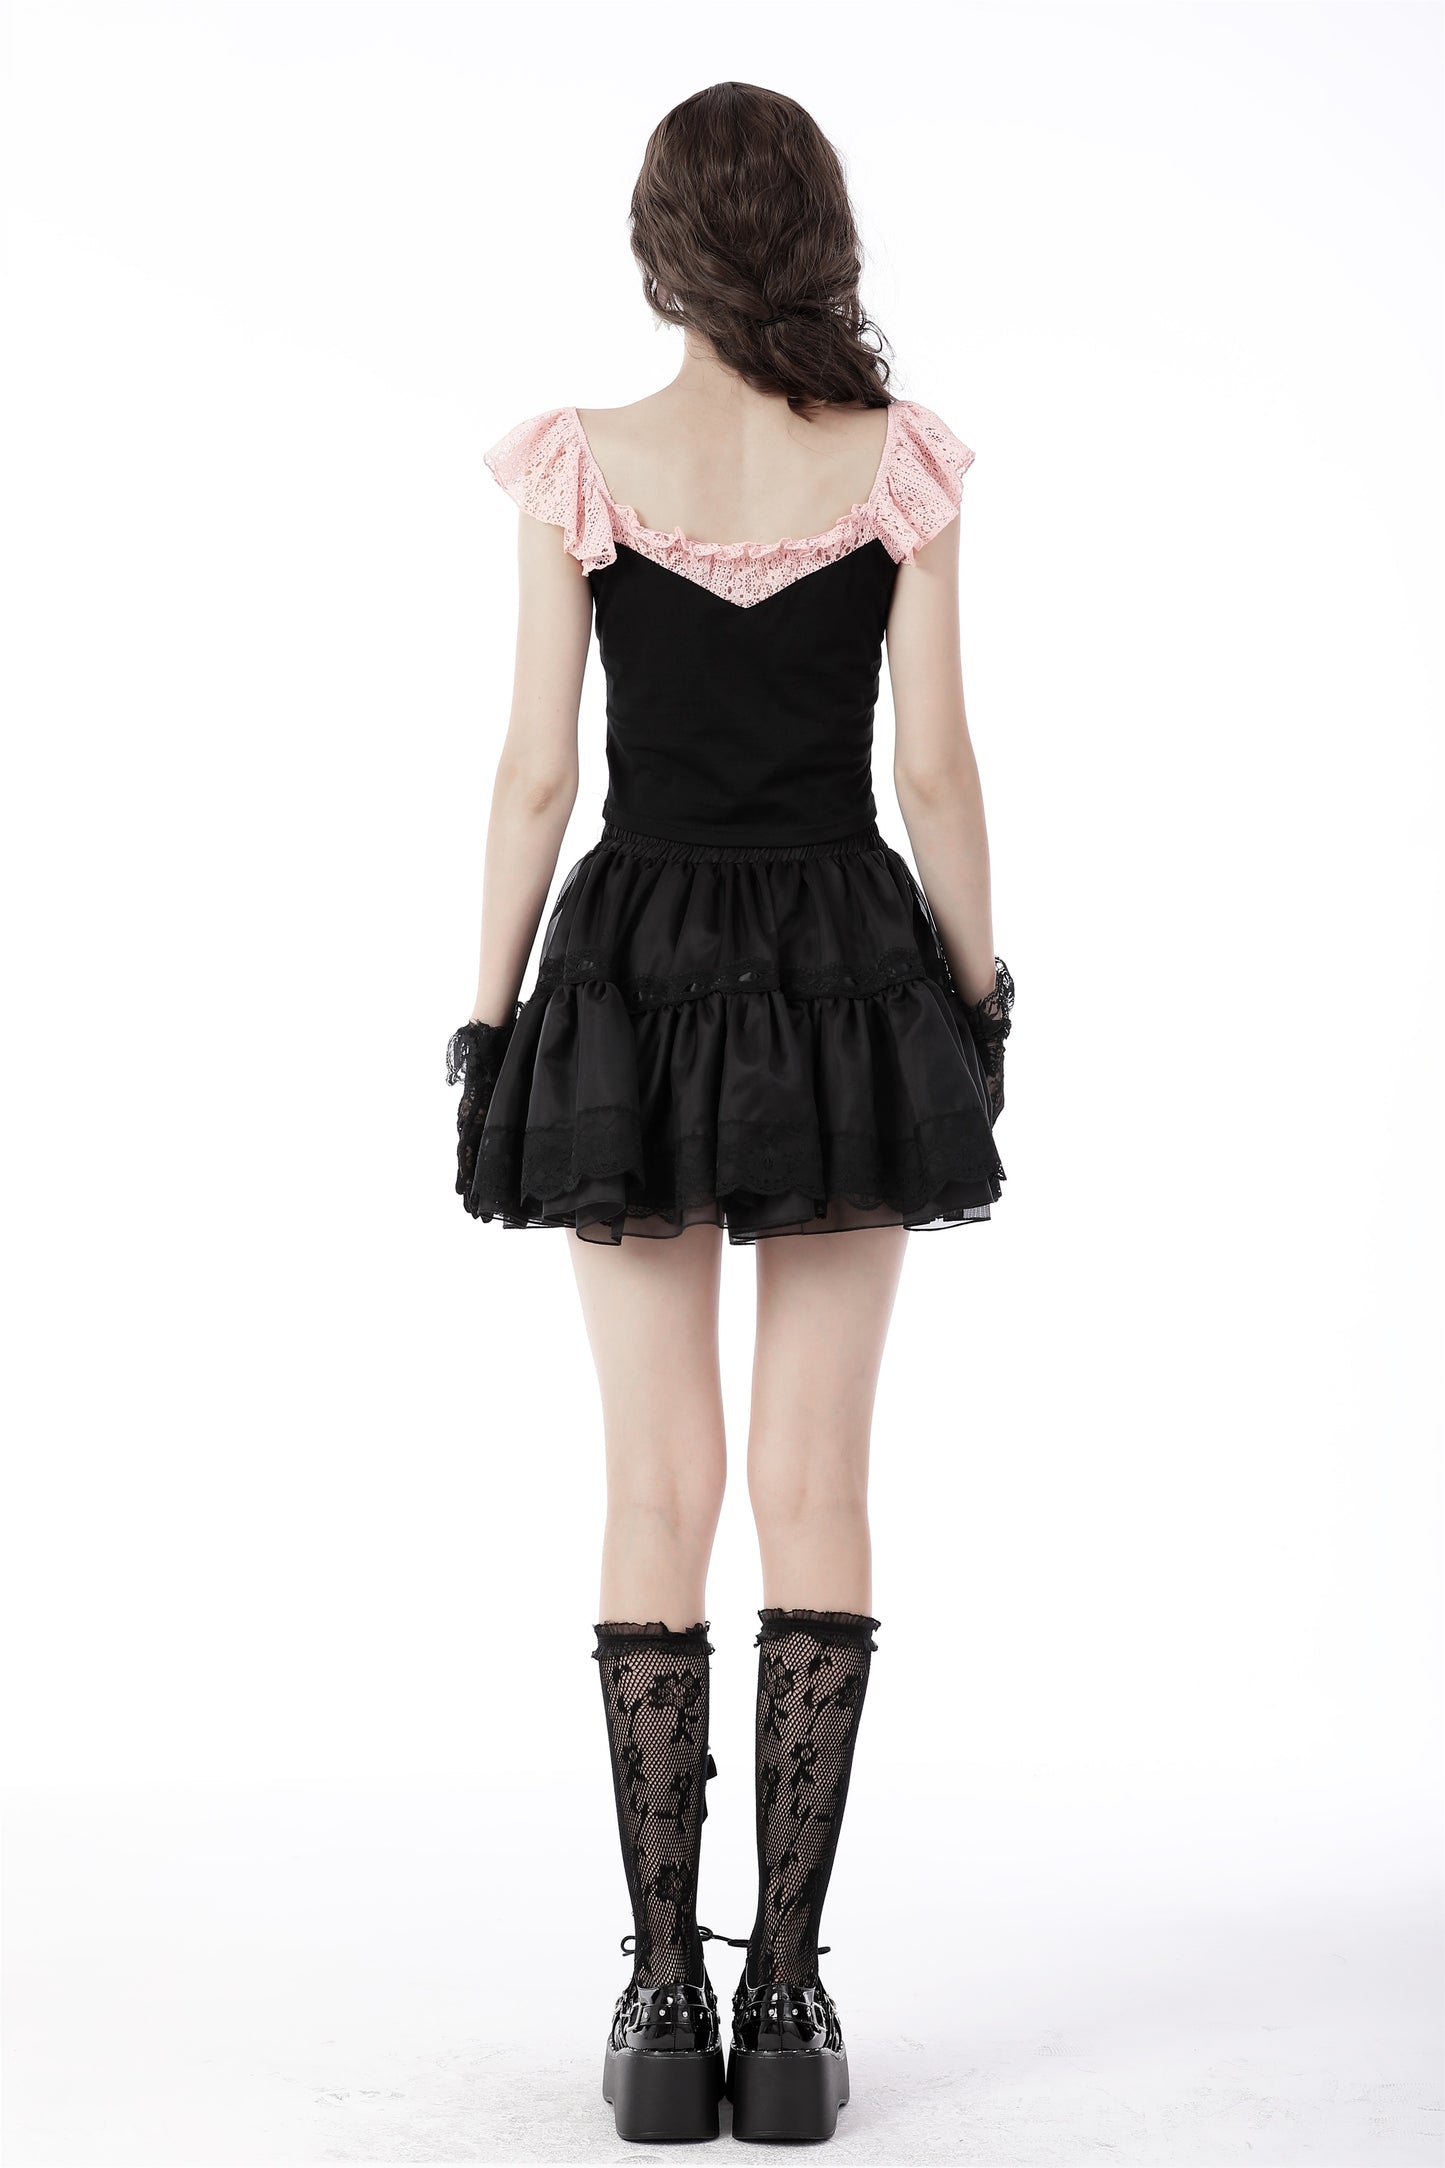 Miss Dolly Pink Frill Top by Dark In Love